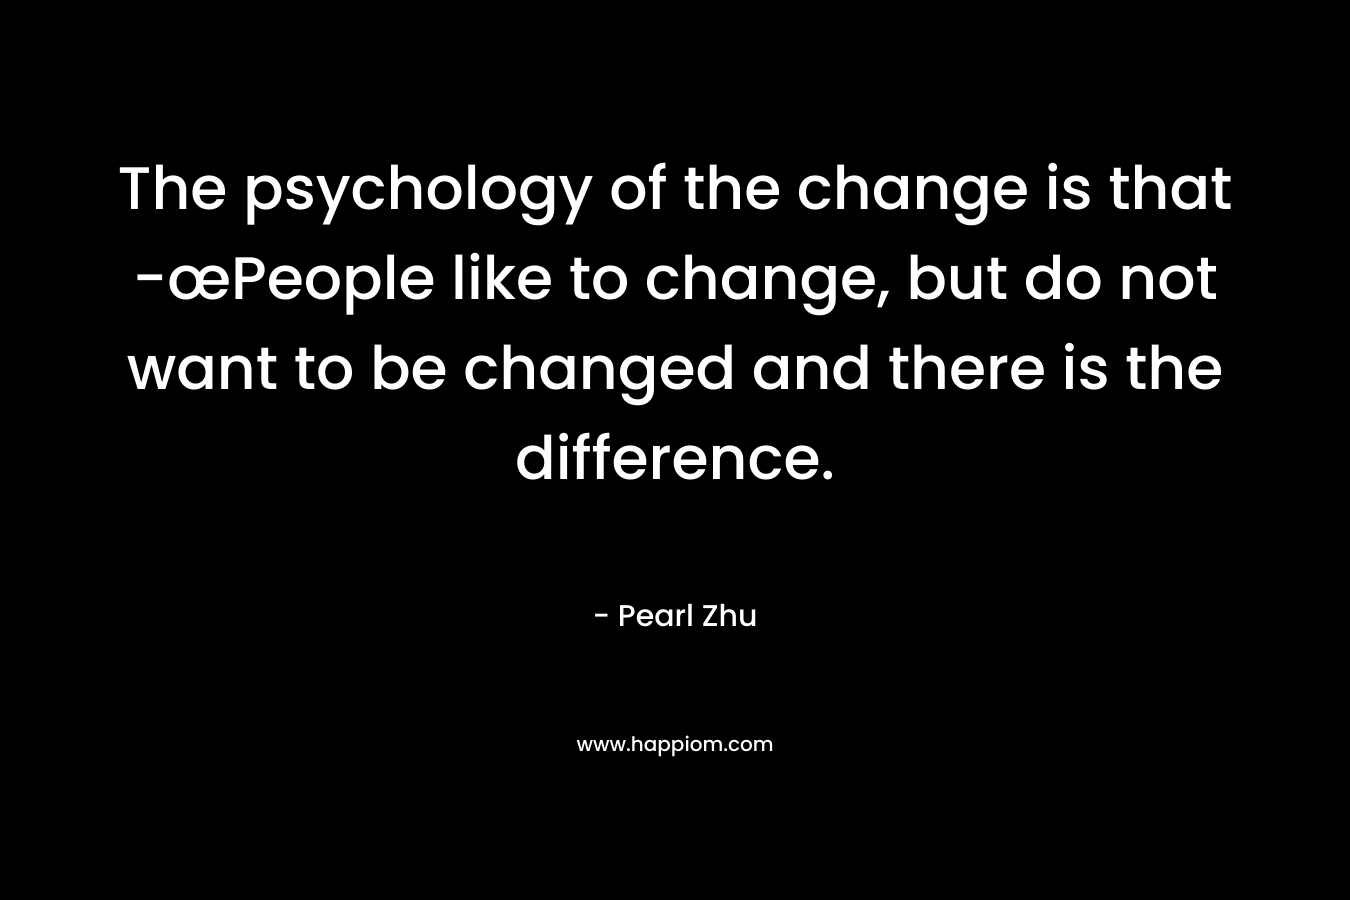 The psychology of the change is that -œPeople like to change, but do not want to be changed and there is the difference.